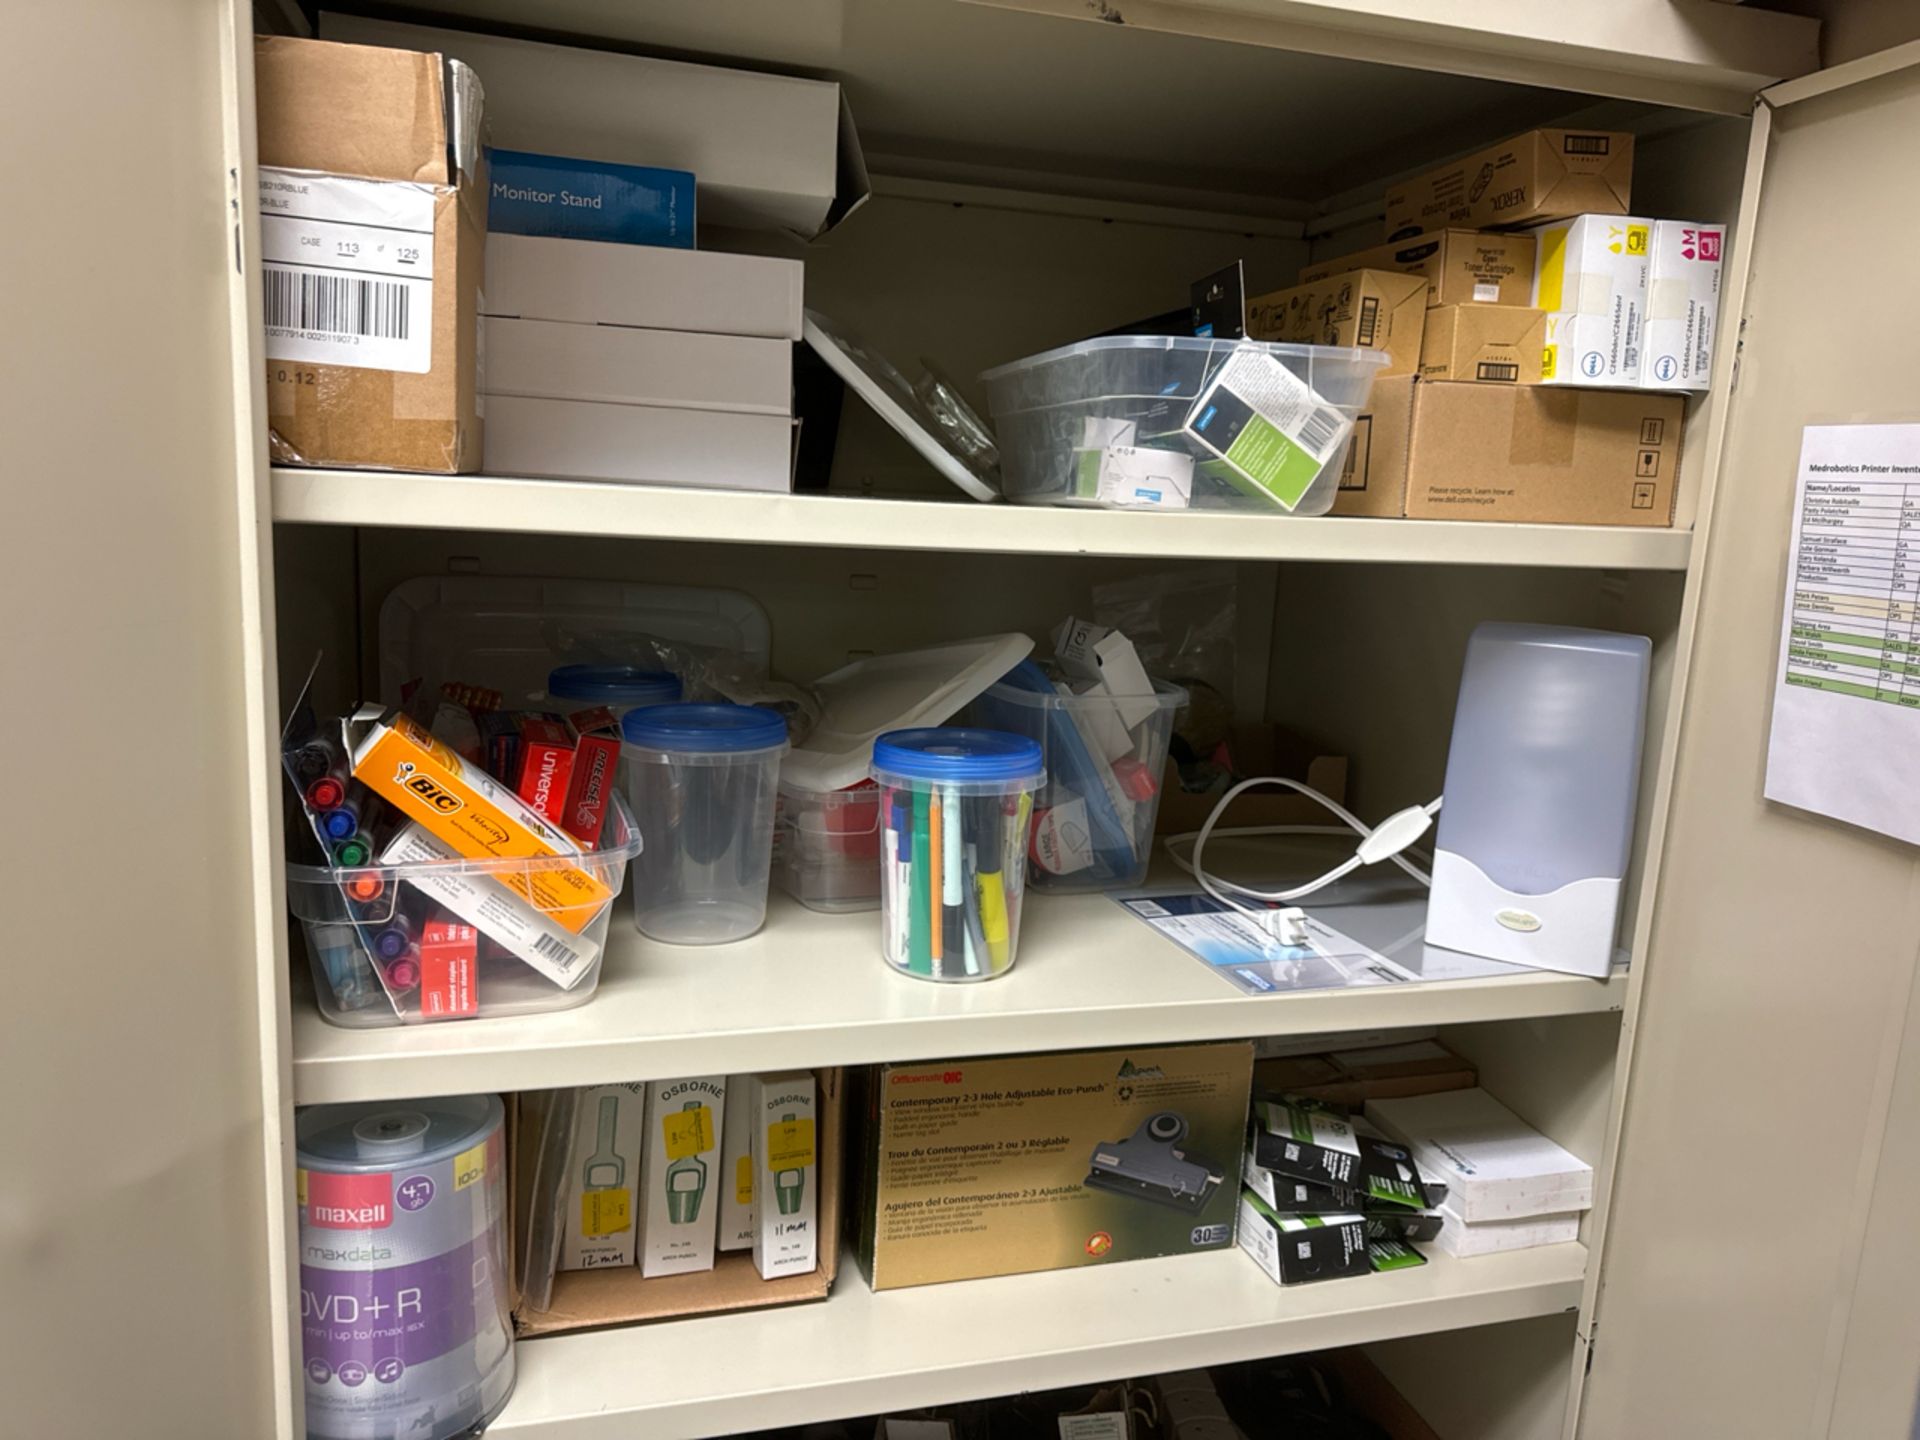 Contents Of Storage Room - Image 18 of 19